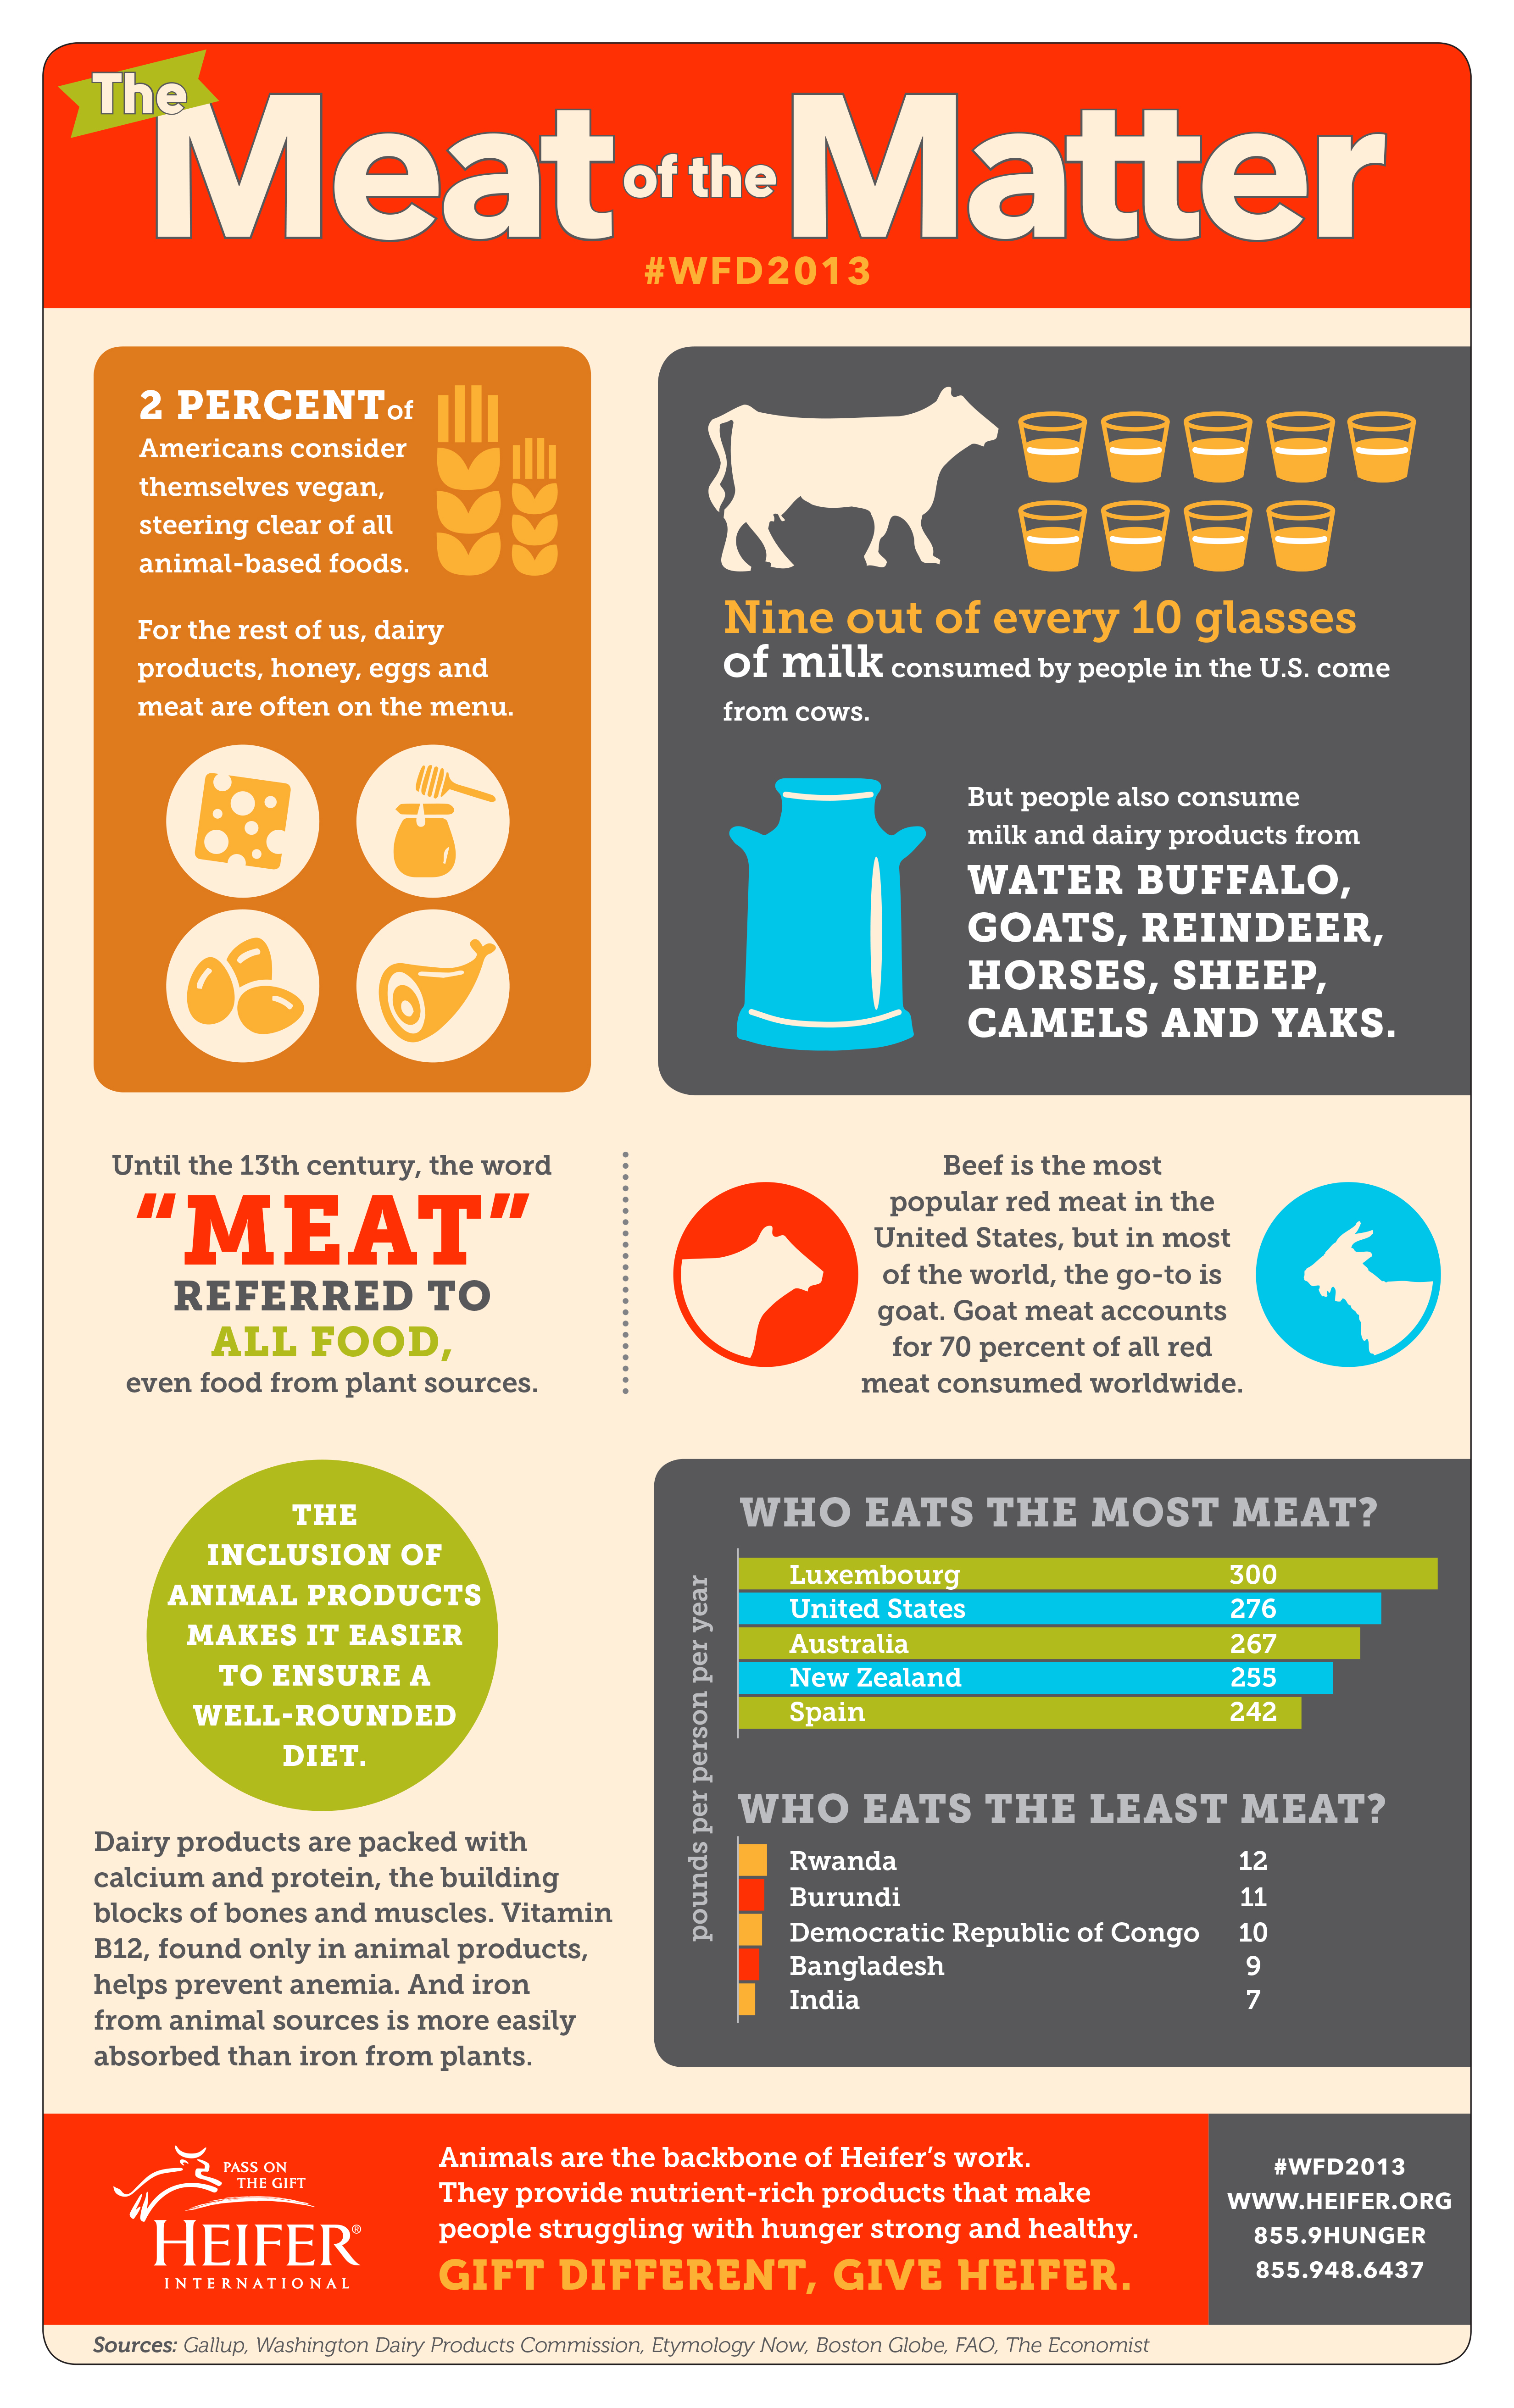 Less meat. Мясо инфографика. Facts about meat. Pro meat.